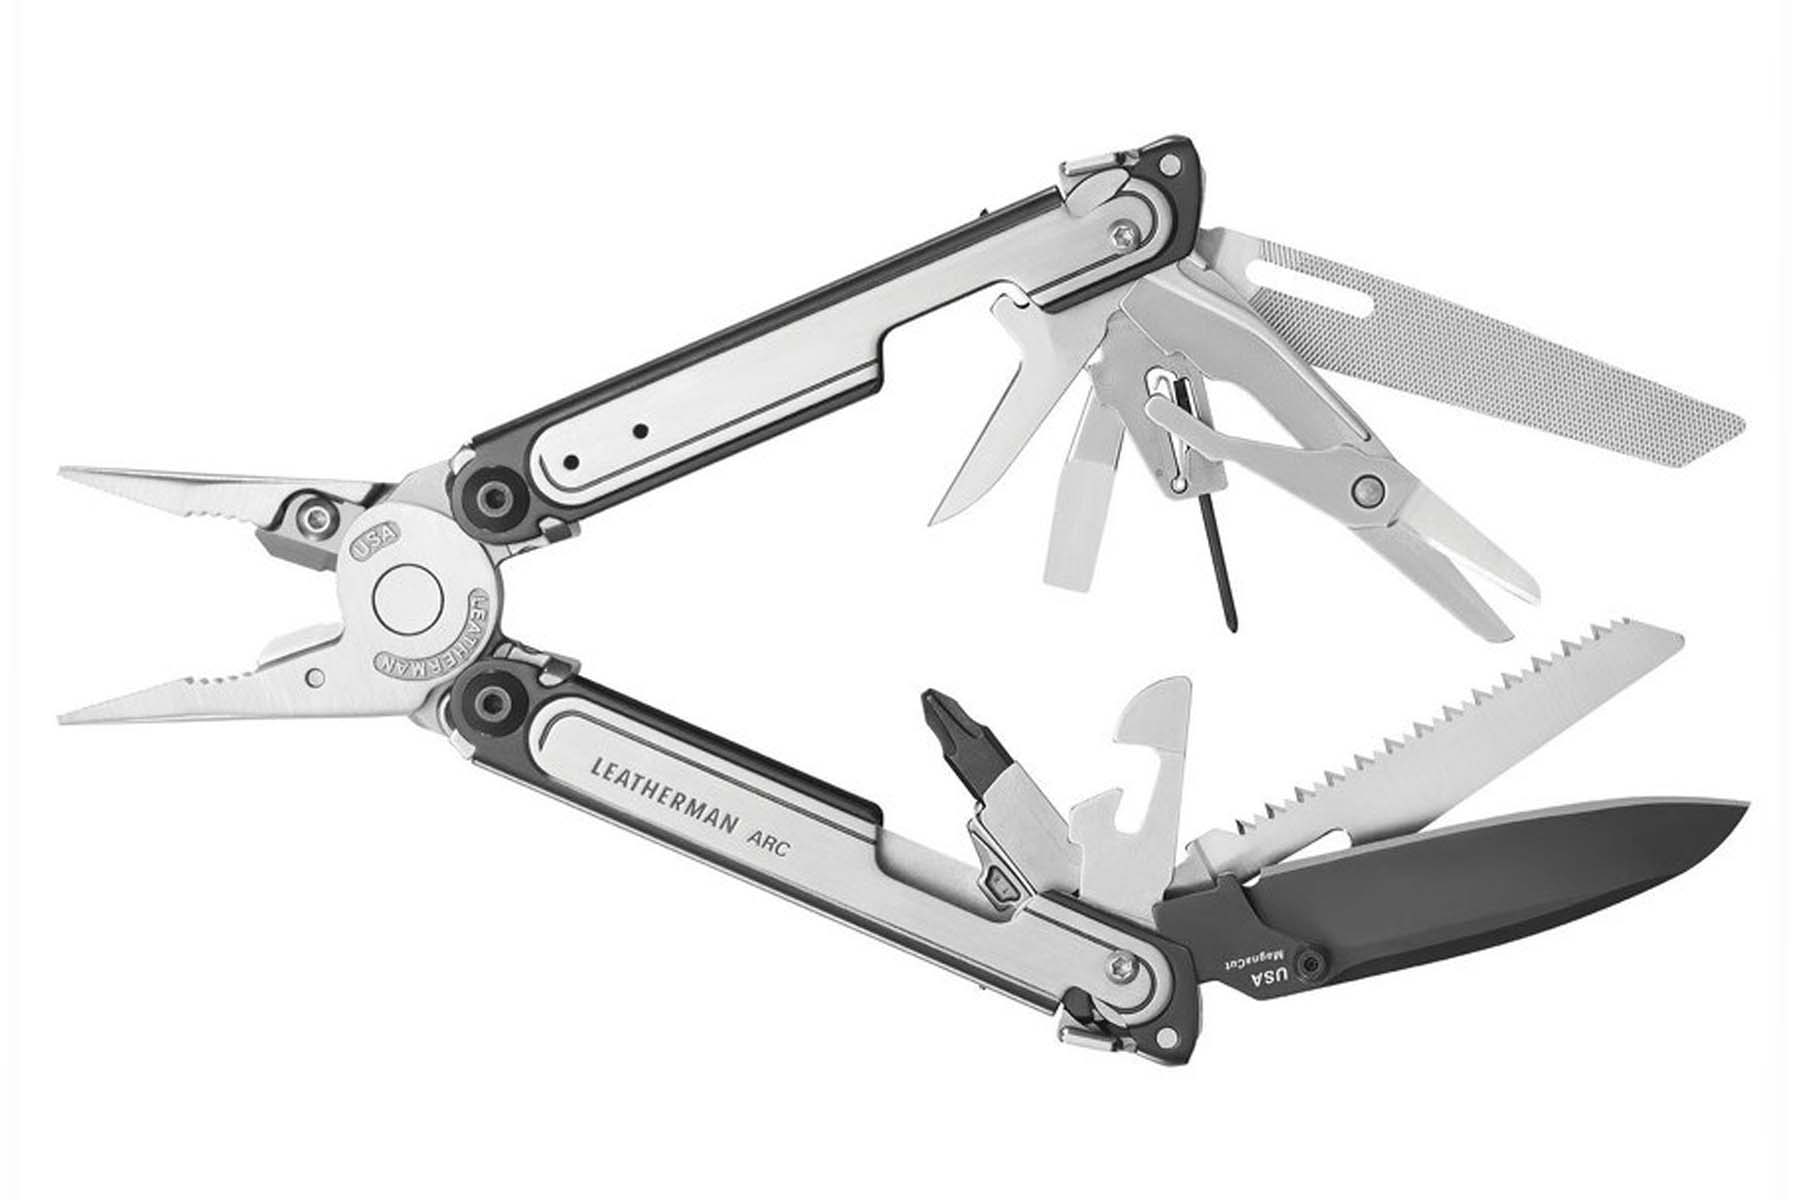 Pince outil multifonctions Leatherman - ARC®